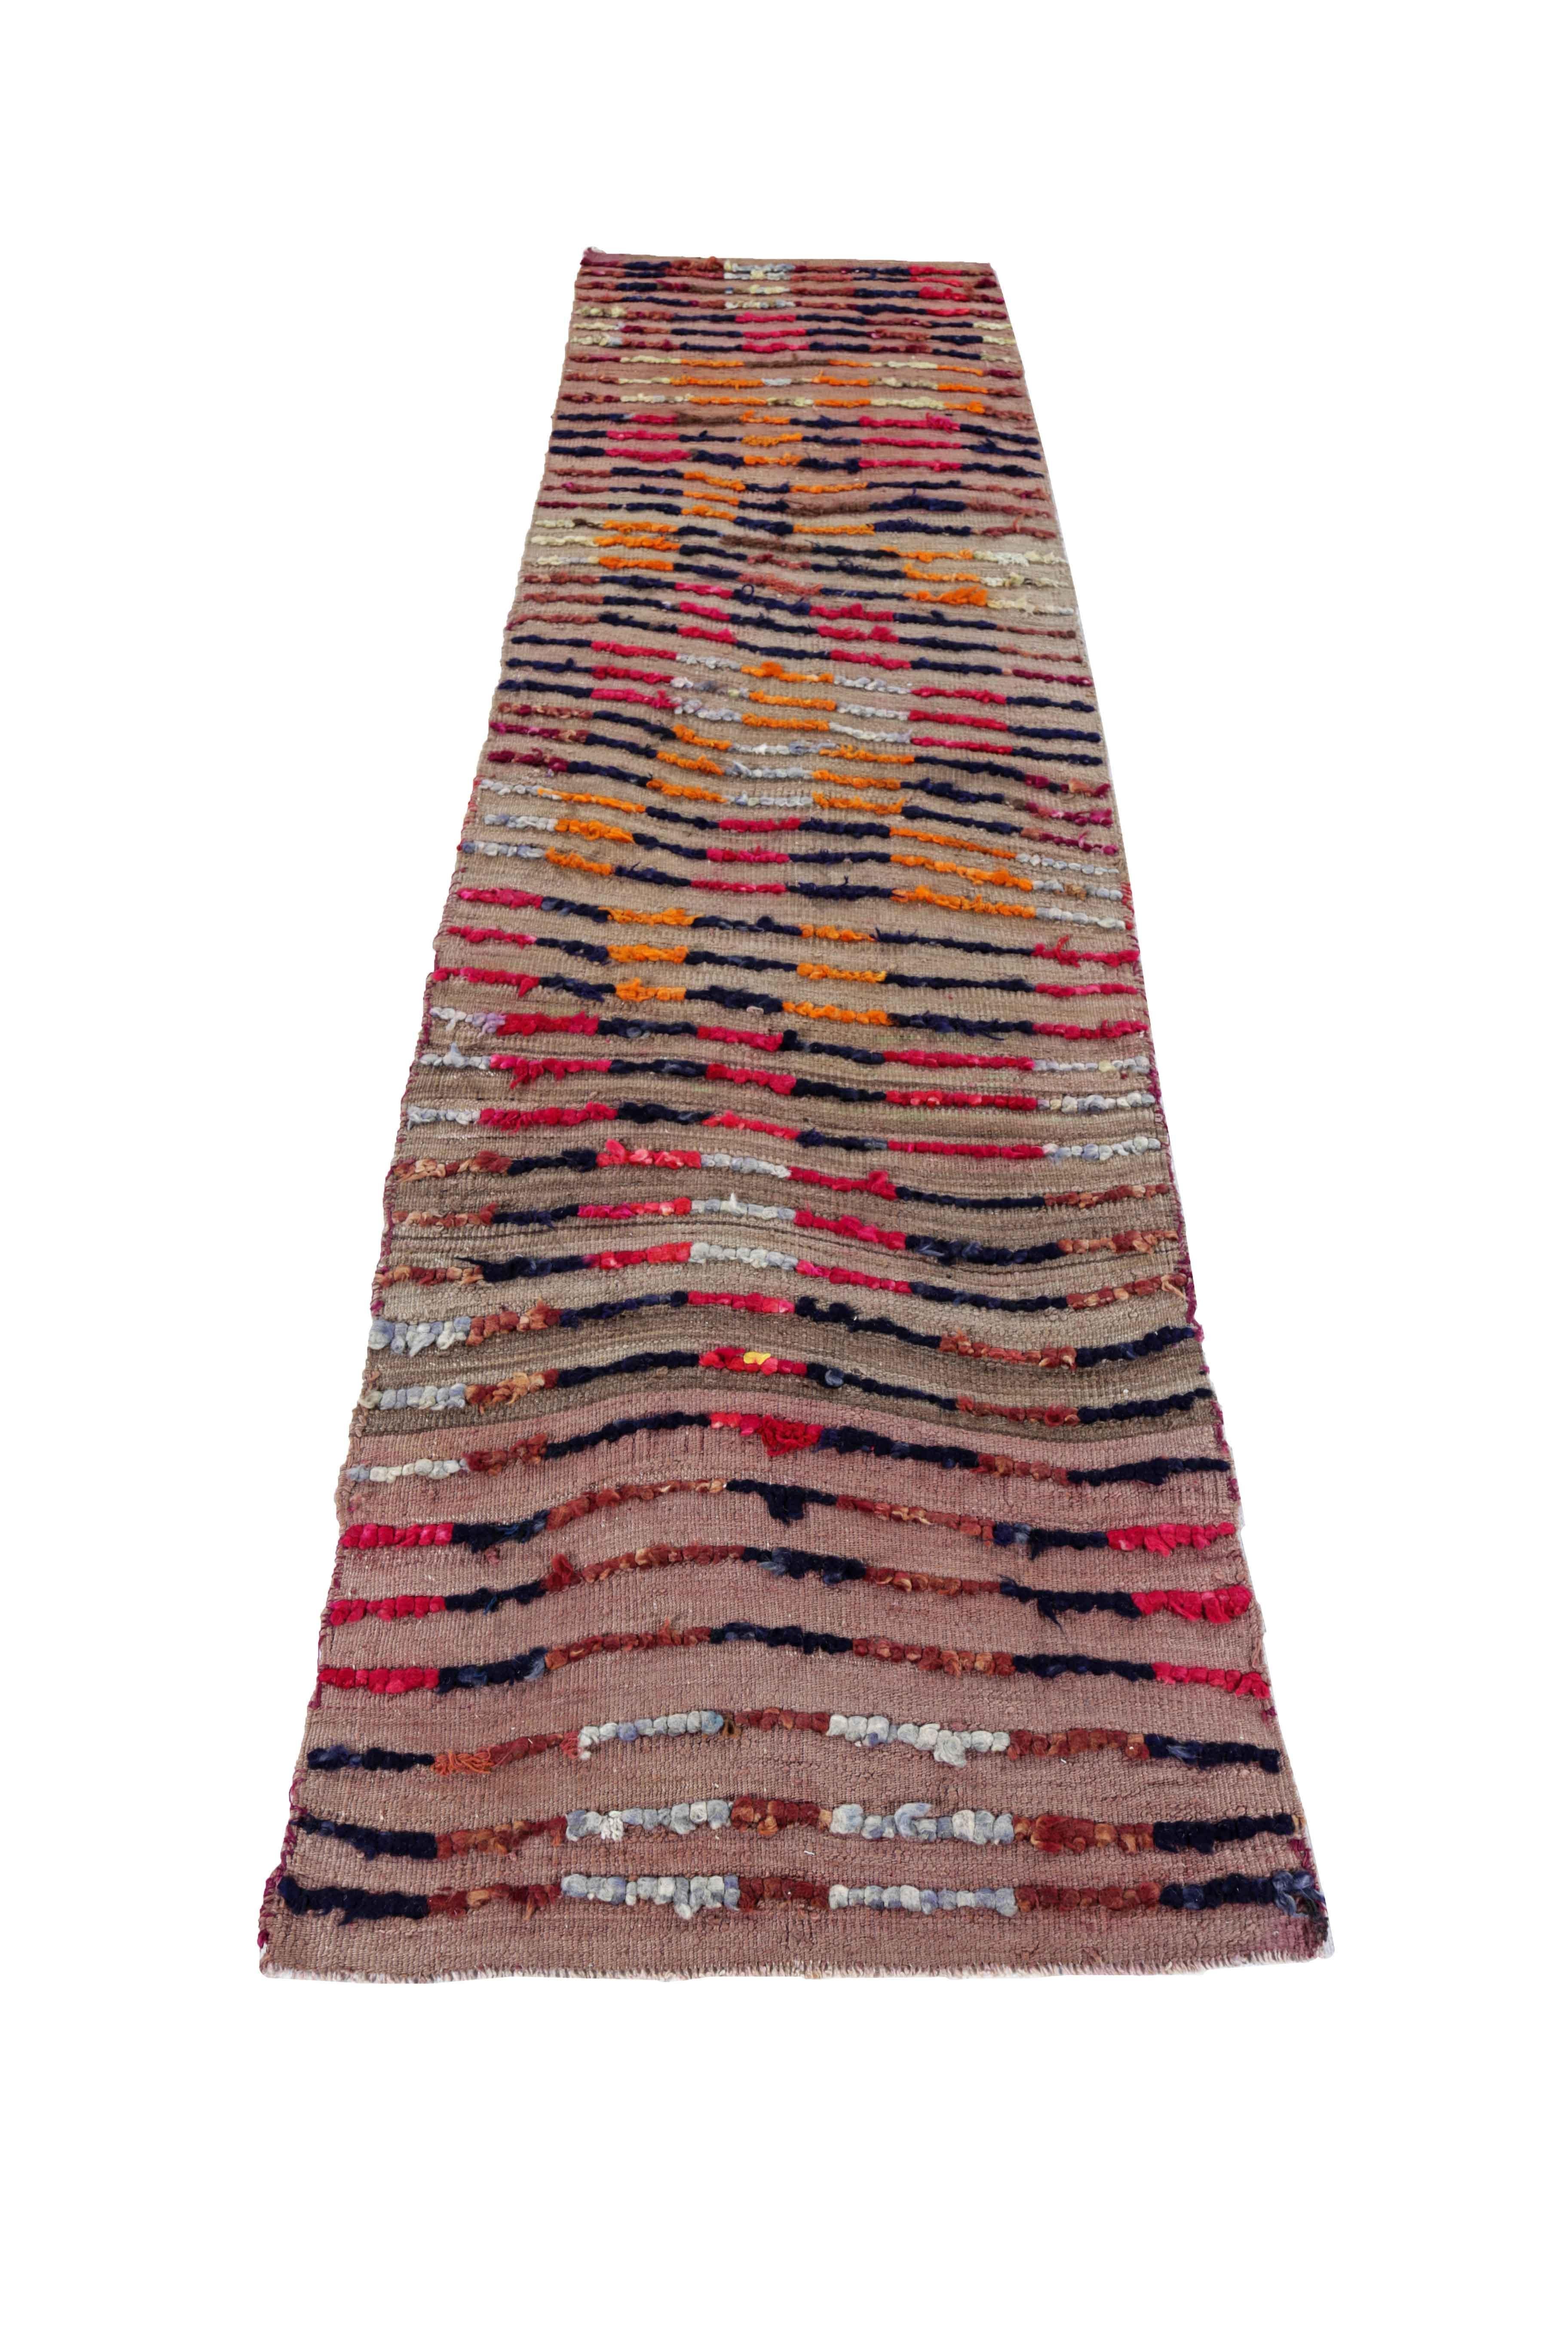 Antique Persian runner rug handwoven from the finest sheep’s wool. It’s colored with all-natural vegetable dyes that are safe for humans and pets. It’s a traditional Gabbeh design handwoven by expert artisans. It’s a lovely runner rug that can be